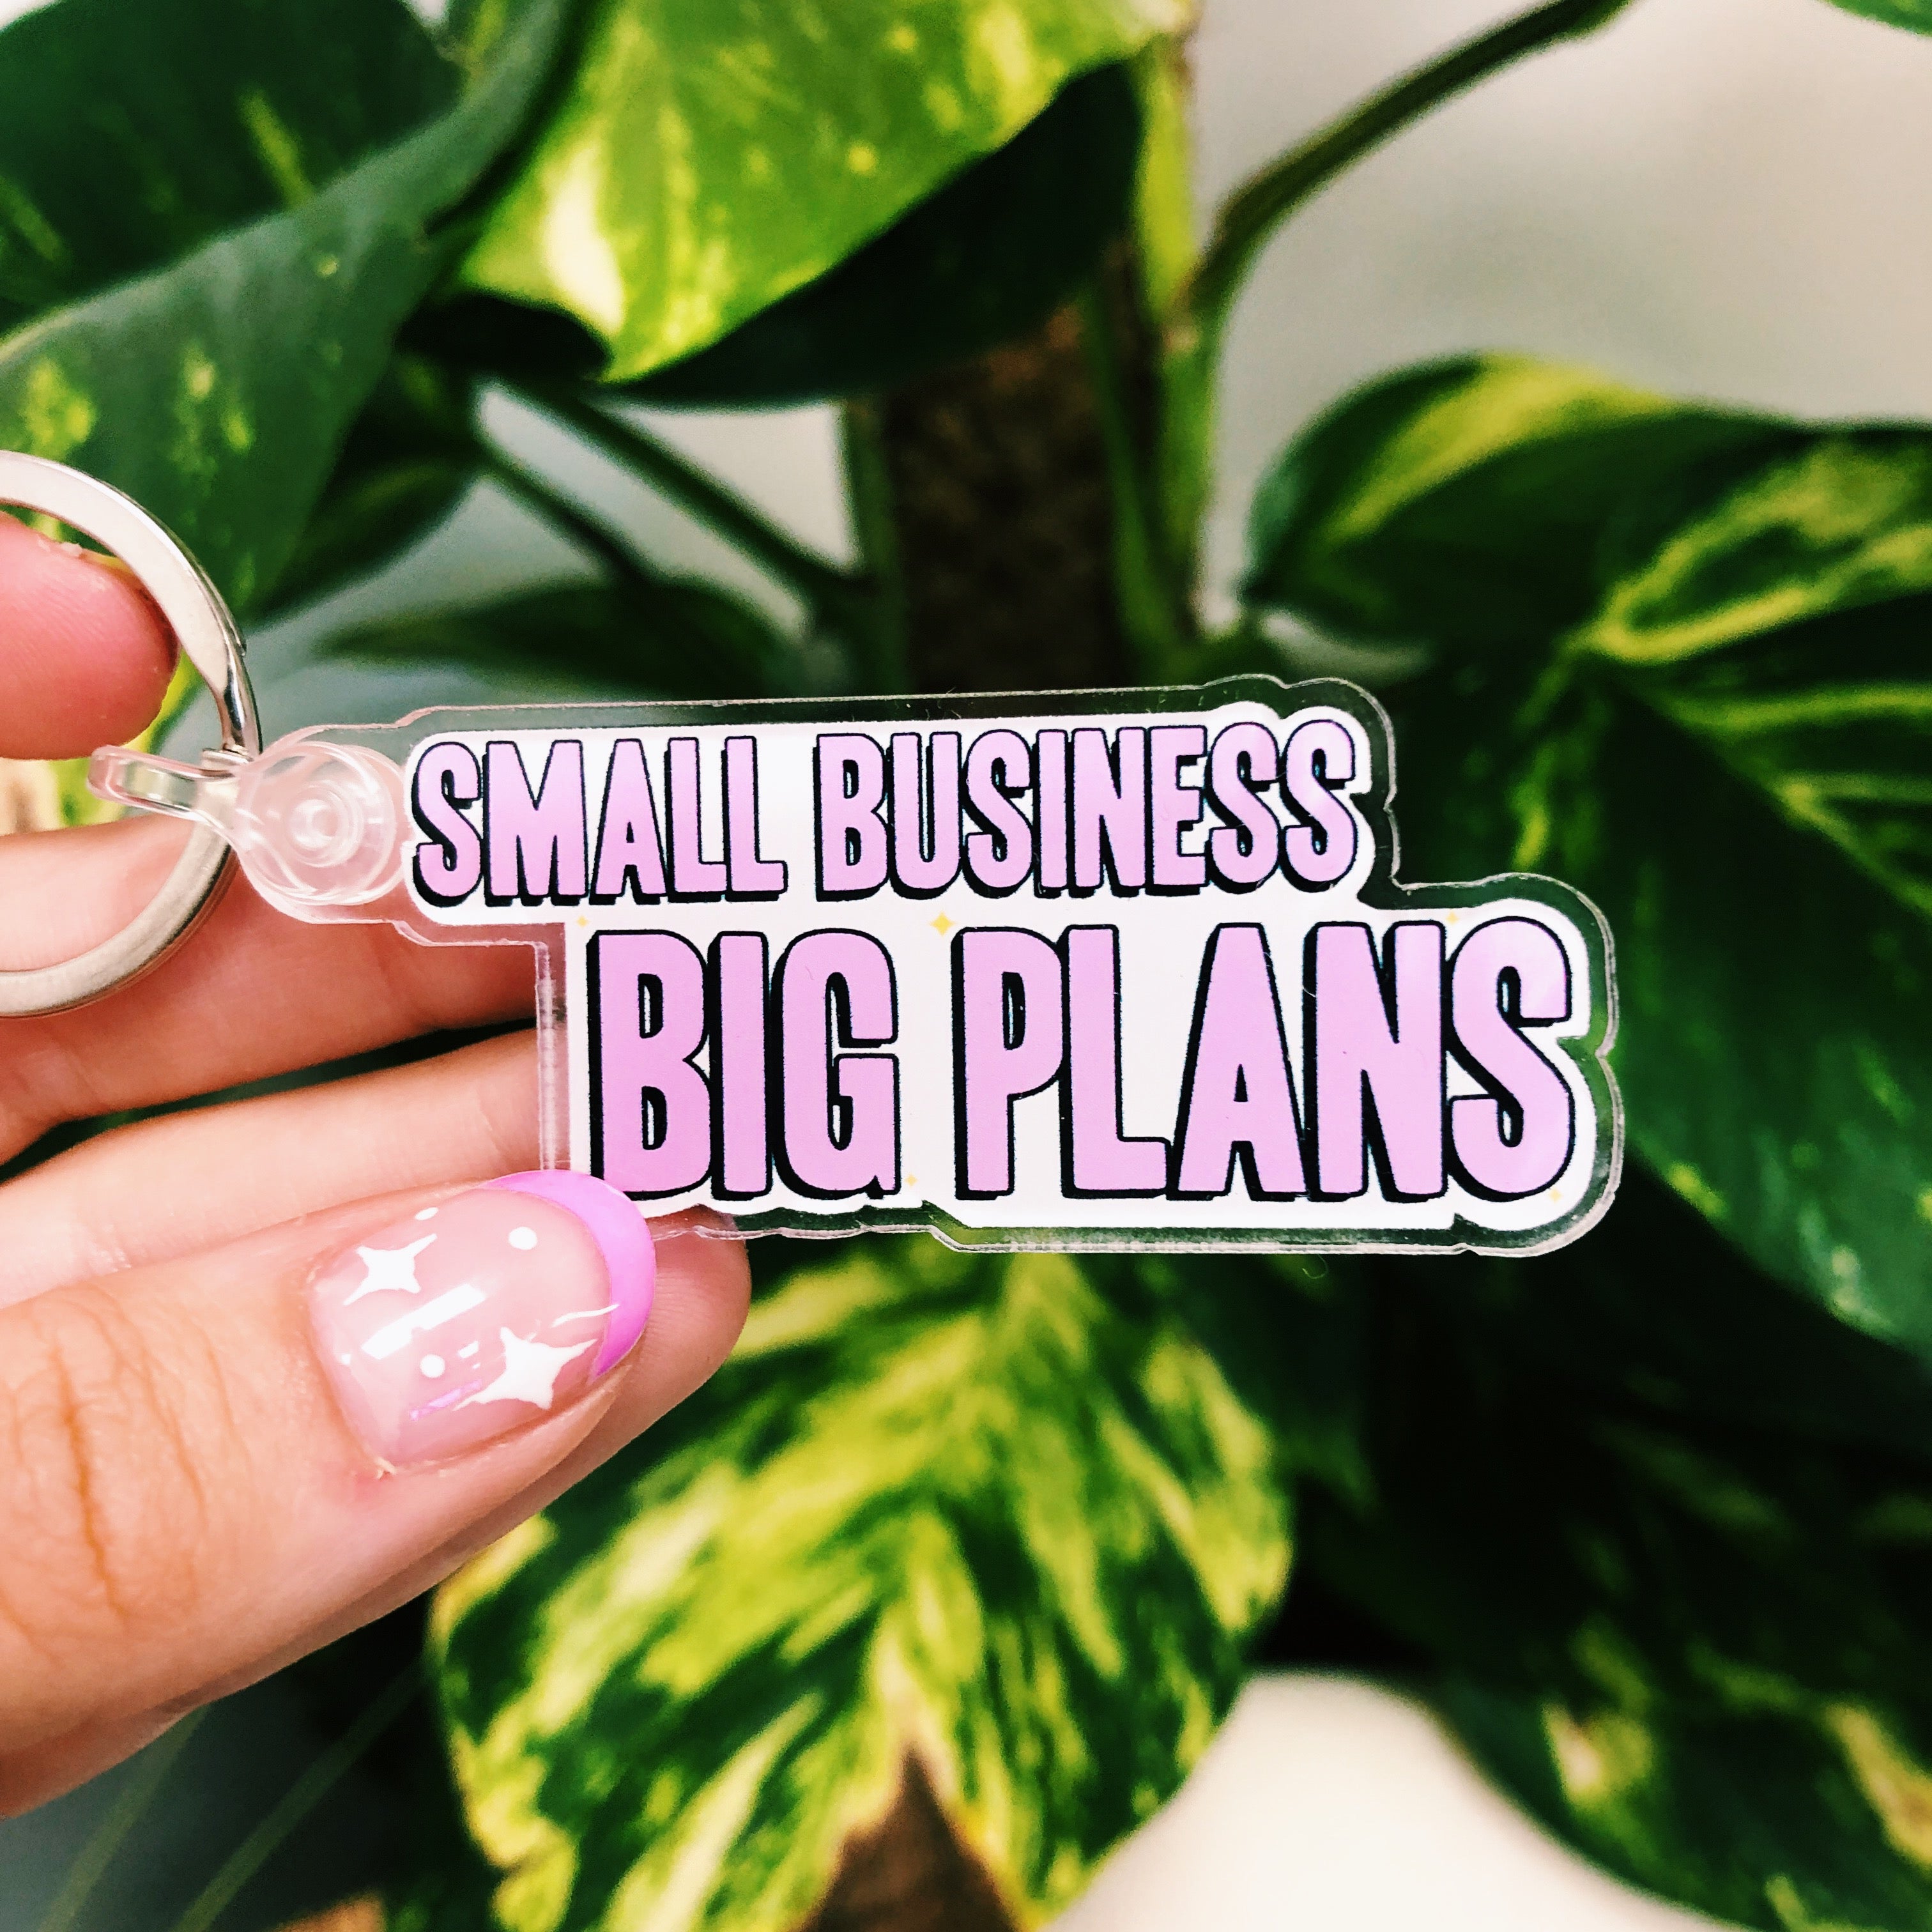 Small business big plans keychain